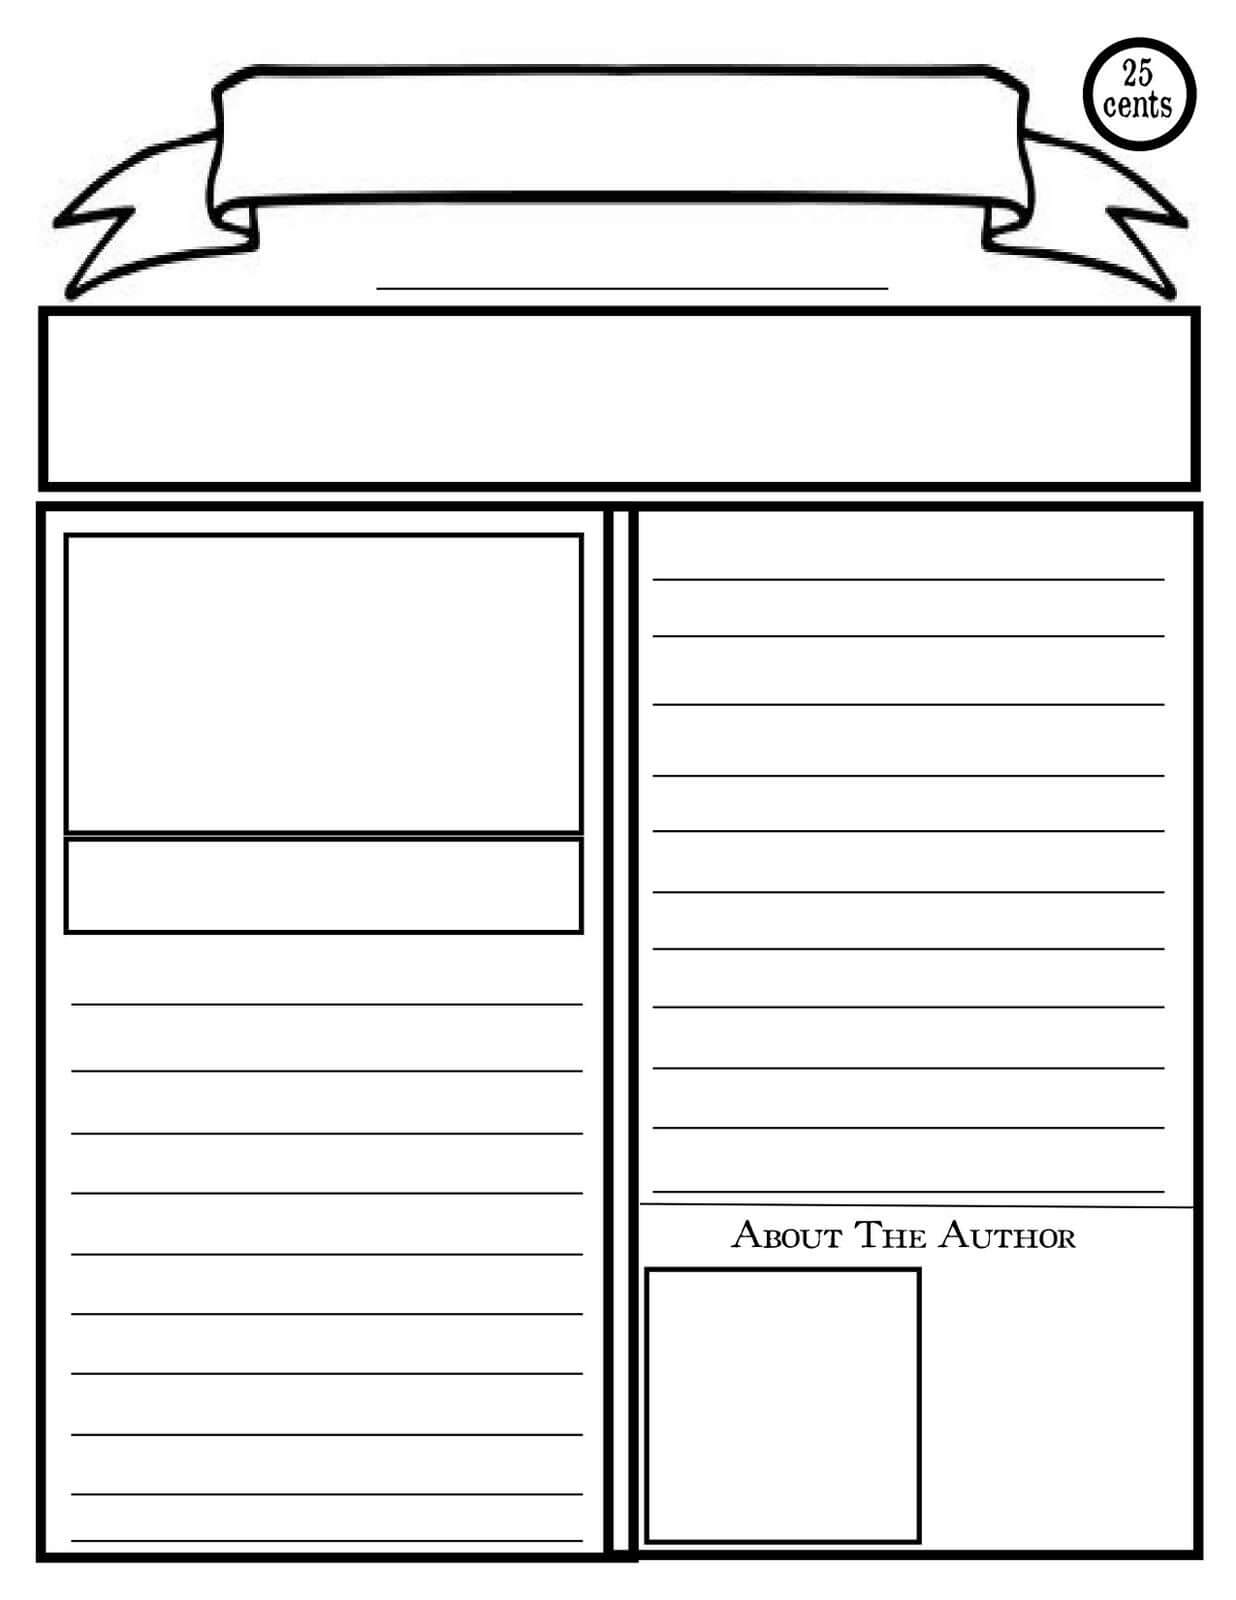 Blank Newspaper Template For Kids Printable | Homework Help Intended For Blank Newspaper Template For Word